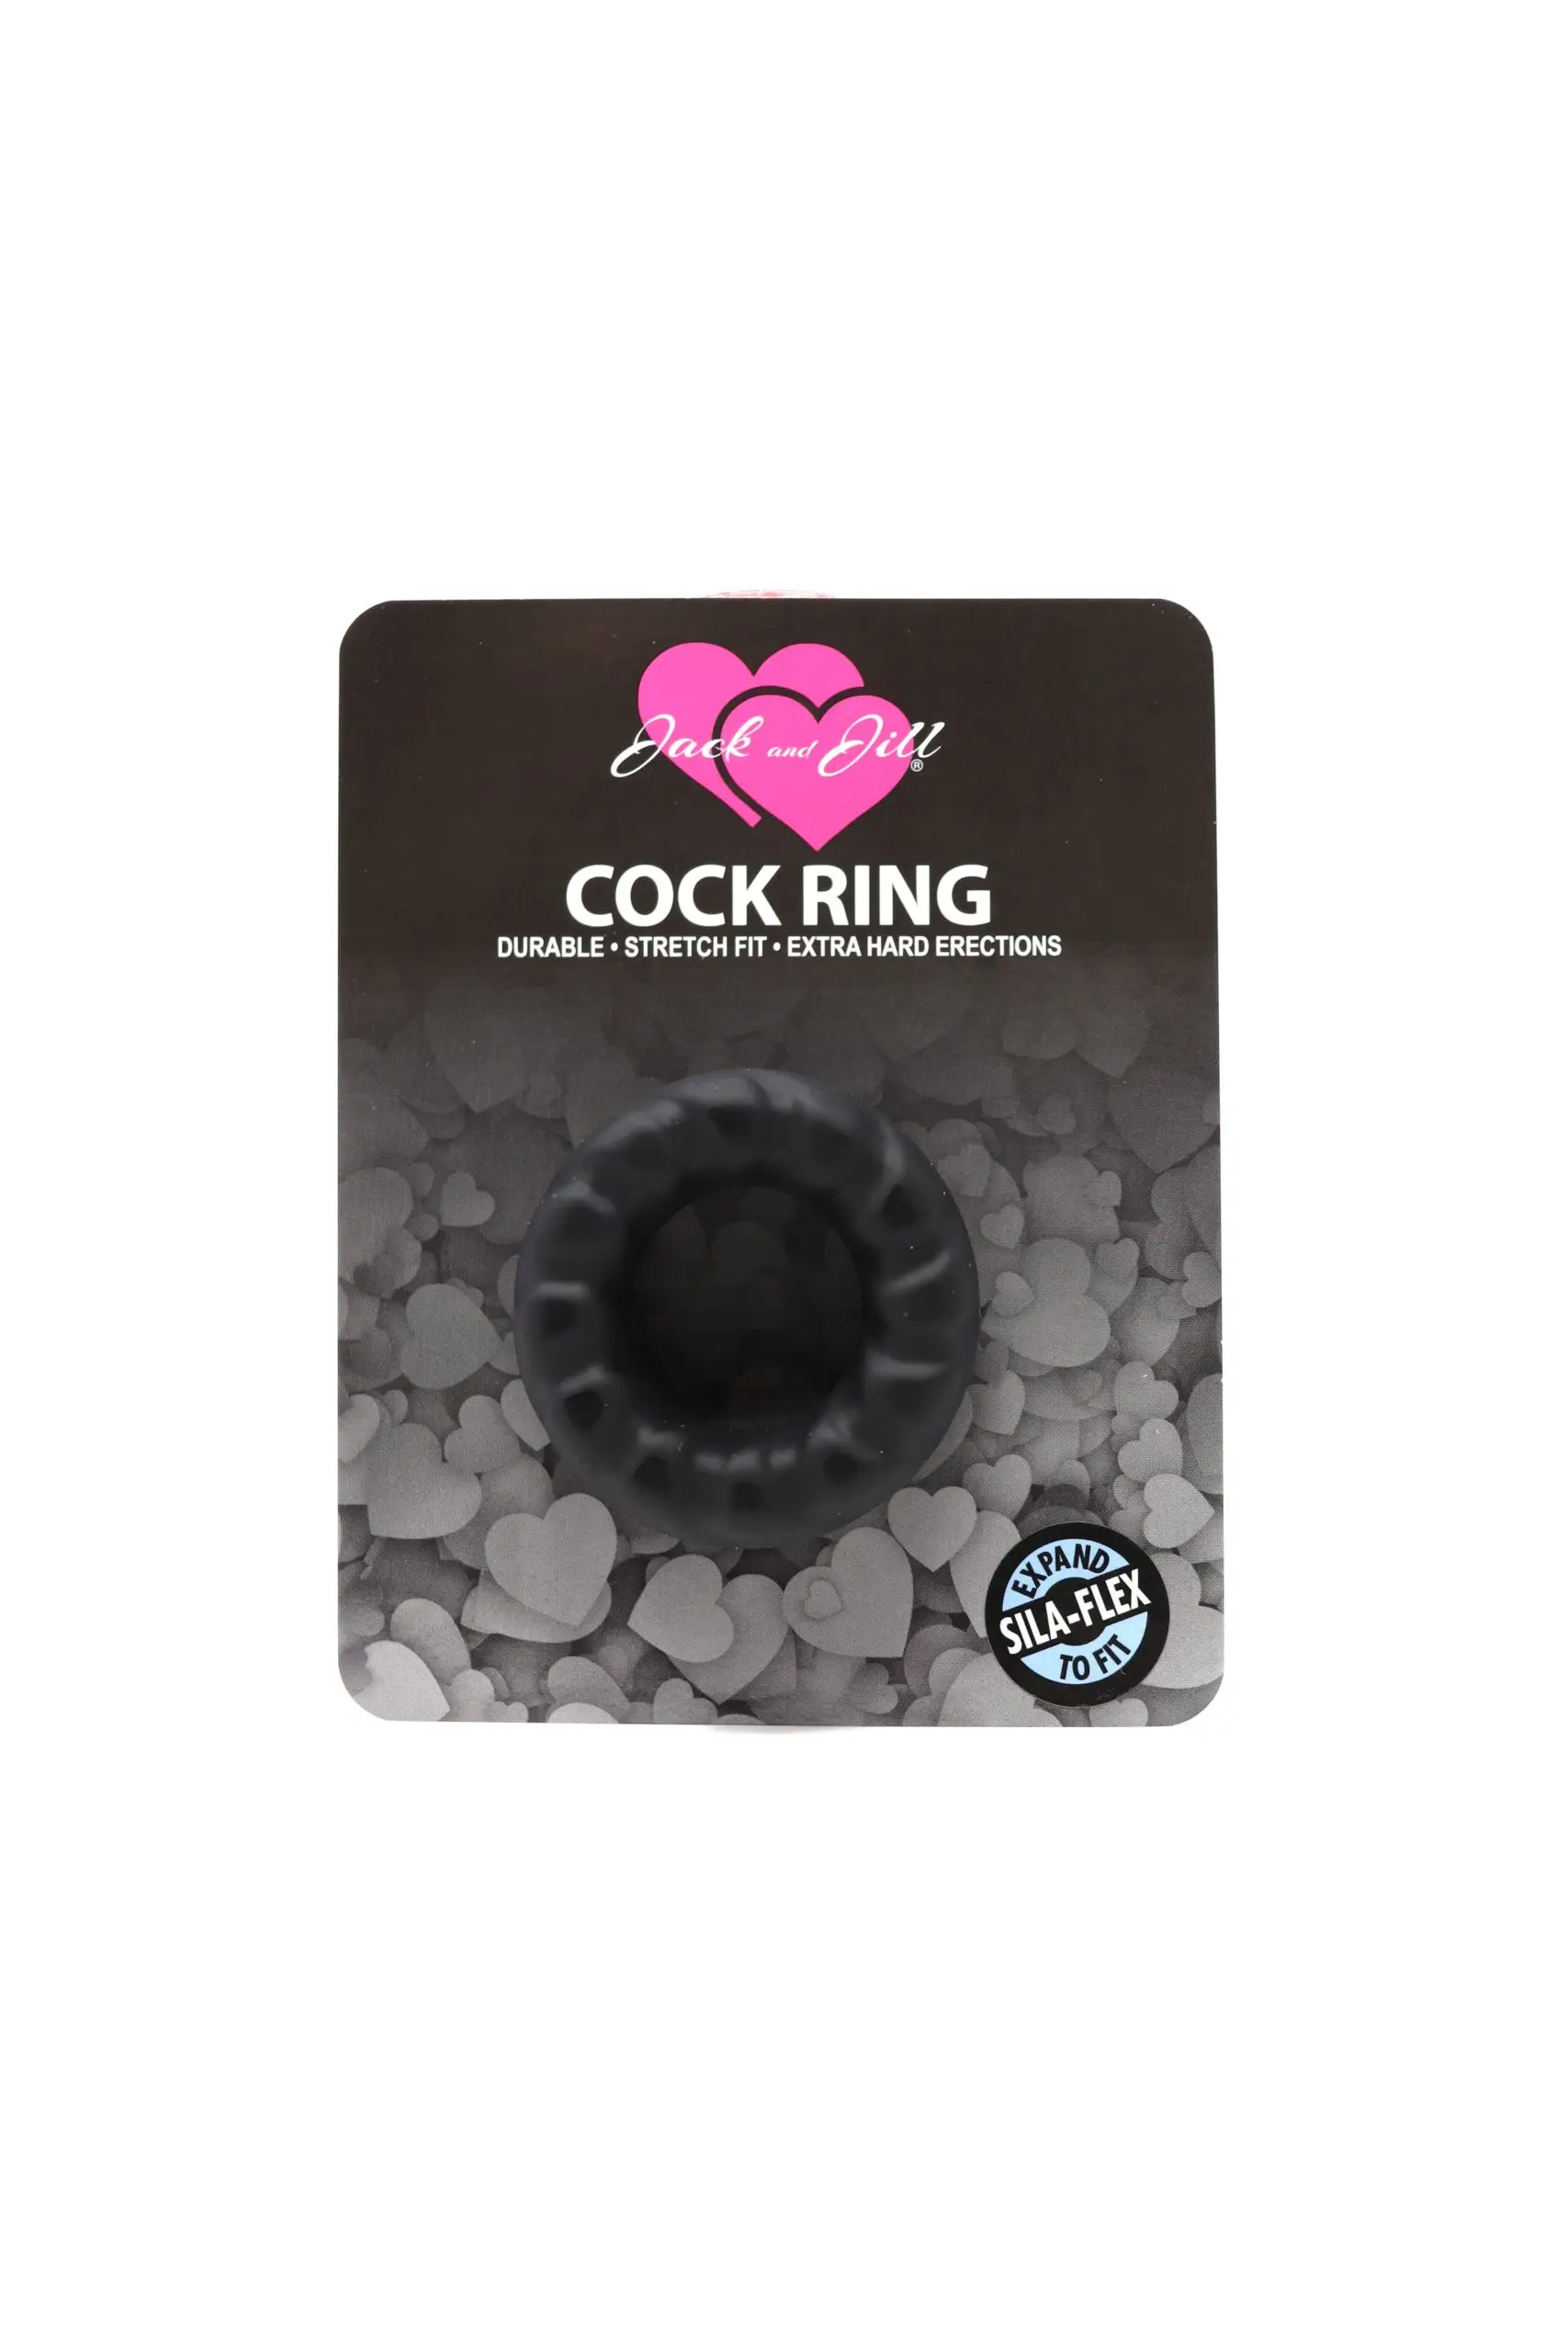 Jack and Jill Cock Ring Silicone Fat Tire Black cock ring